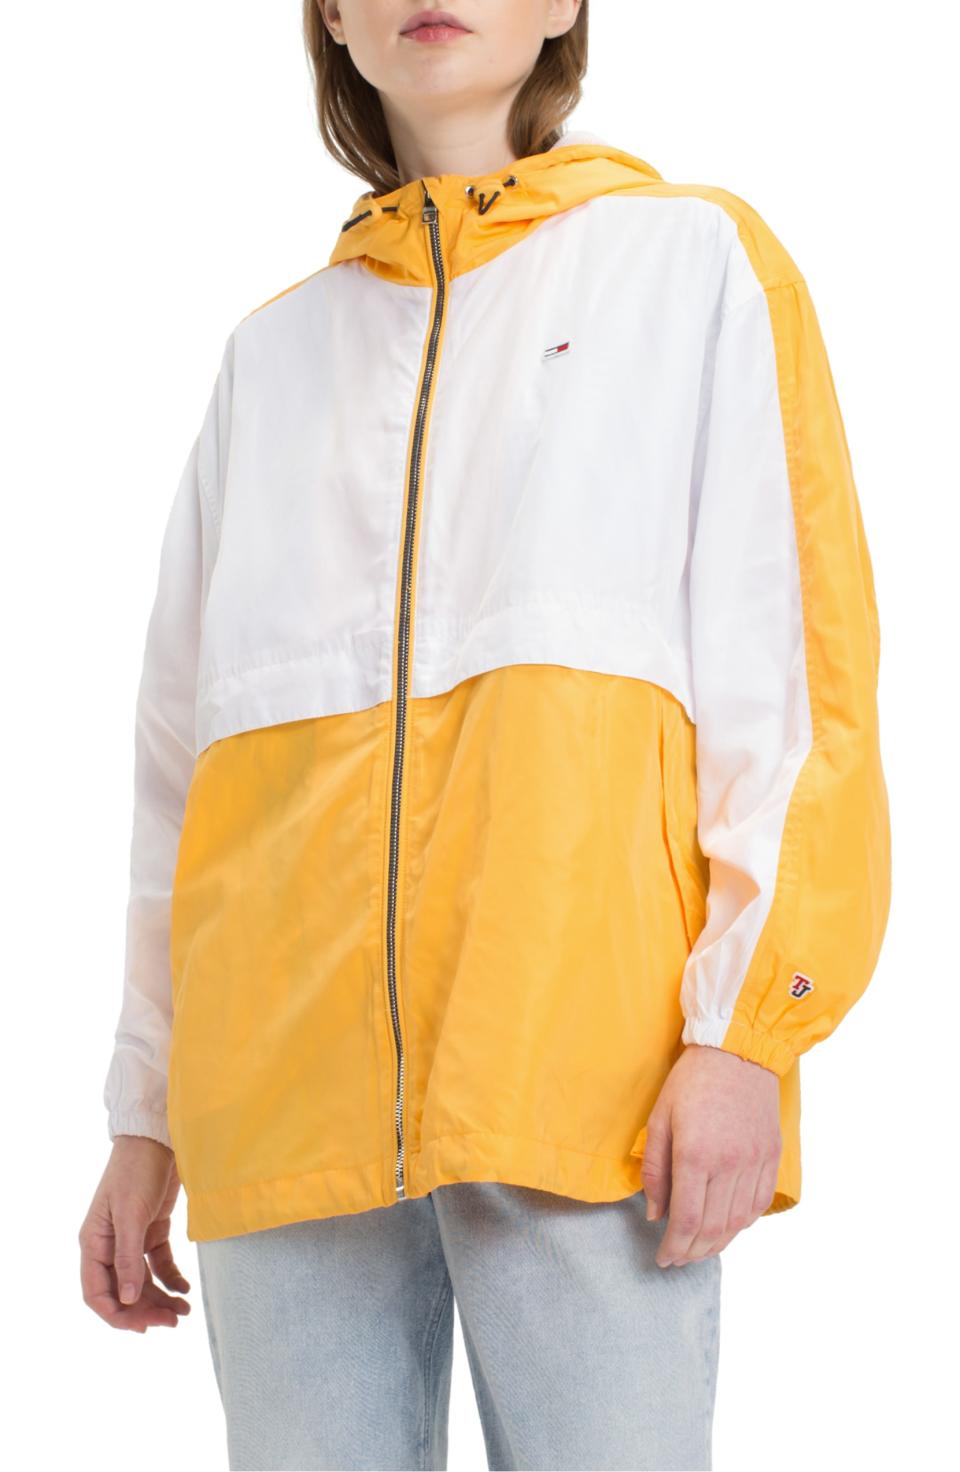 <a rel="nofollow noopener" href="https://rstyle.me/n/c7774vchdw" target="_blank" data-ylk="slk:TJW Stripe Windbreaker Jacket, Tommy Hilfiger, $149"Designers like Isabel Marant made anoraks and windbreakers a must-have for spring 2018. With the influence of sport and tech continuing into fall, these lightweight outerwear styles will make great and unexpected layering pieces, especially zipped up and worn like a shirt.";elm:context_link;itc:0;sec:content-canvas" class="link ">TJW Stripe Windbreaker Jacket, Tommy Hilfiger, $149<p>"Designers like Isabel Marant made anoraks and windbreakers a must-have for spring 2018. With the influence of sport and tech continuing into fall, these lightweight outerwear styles will make great and unexpected layering pieces, especially zipped up and worn like a shirt."</p> </a>